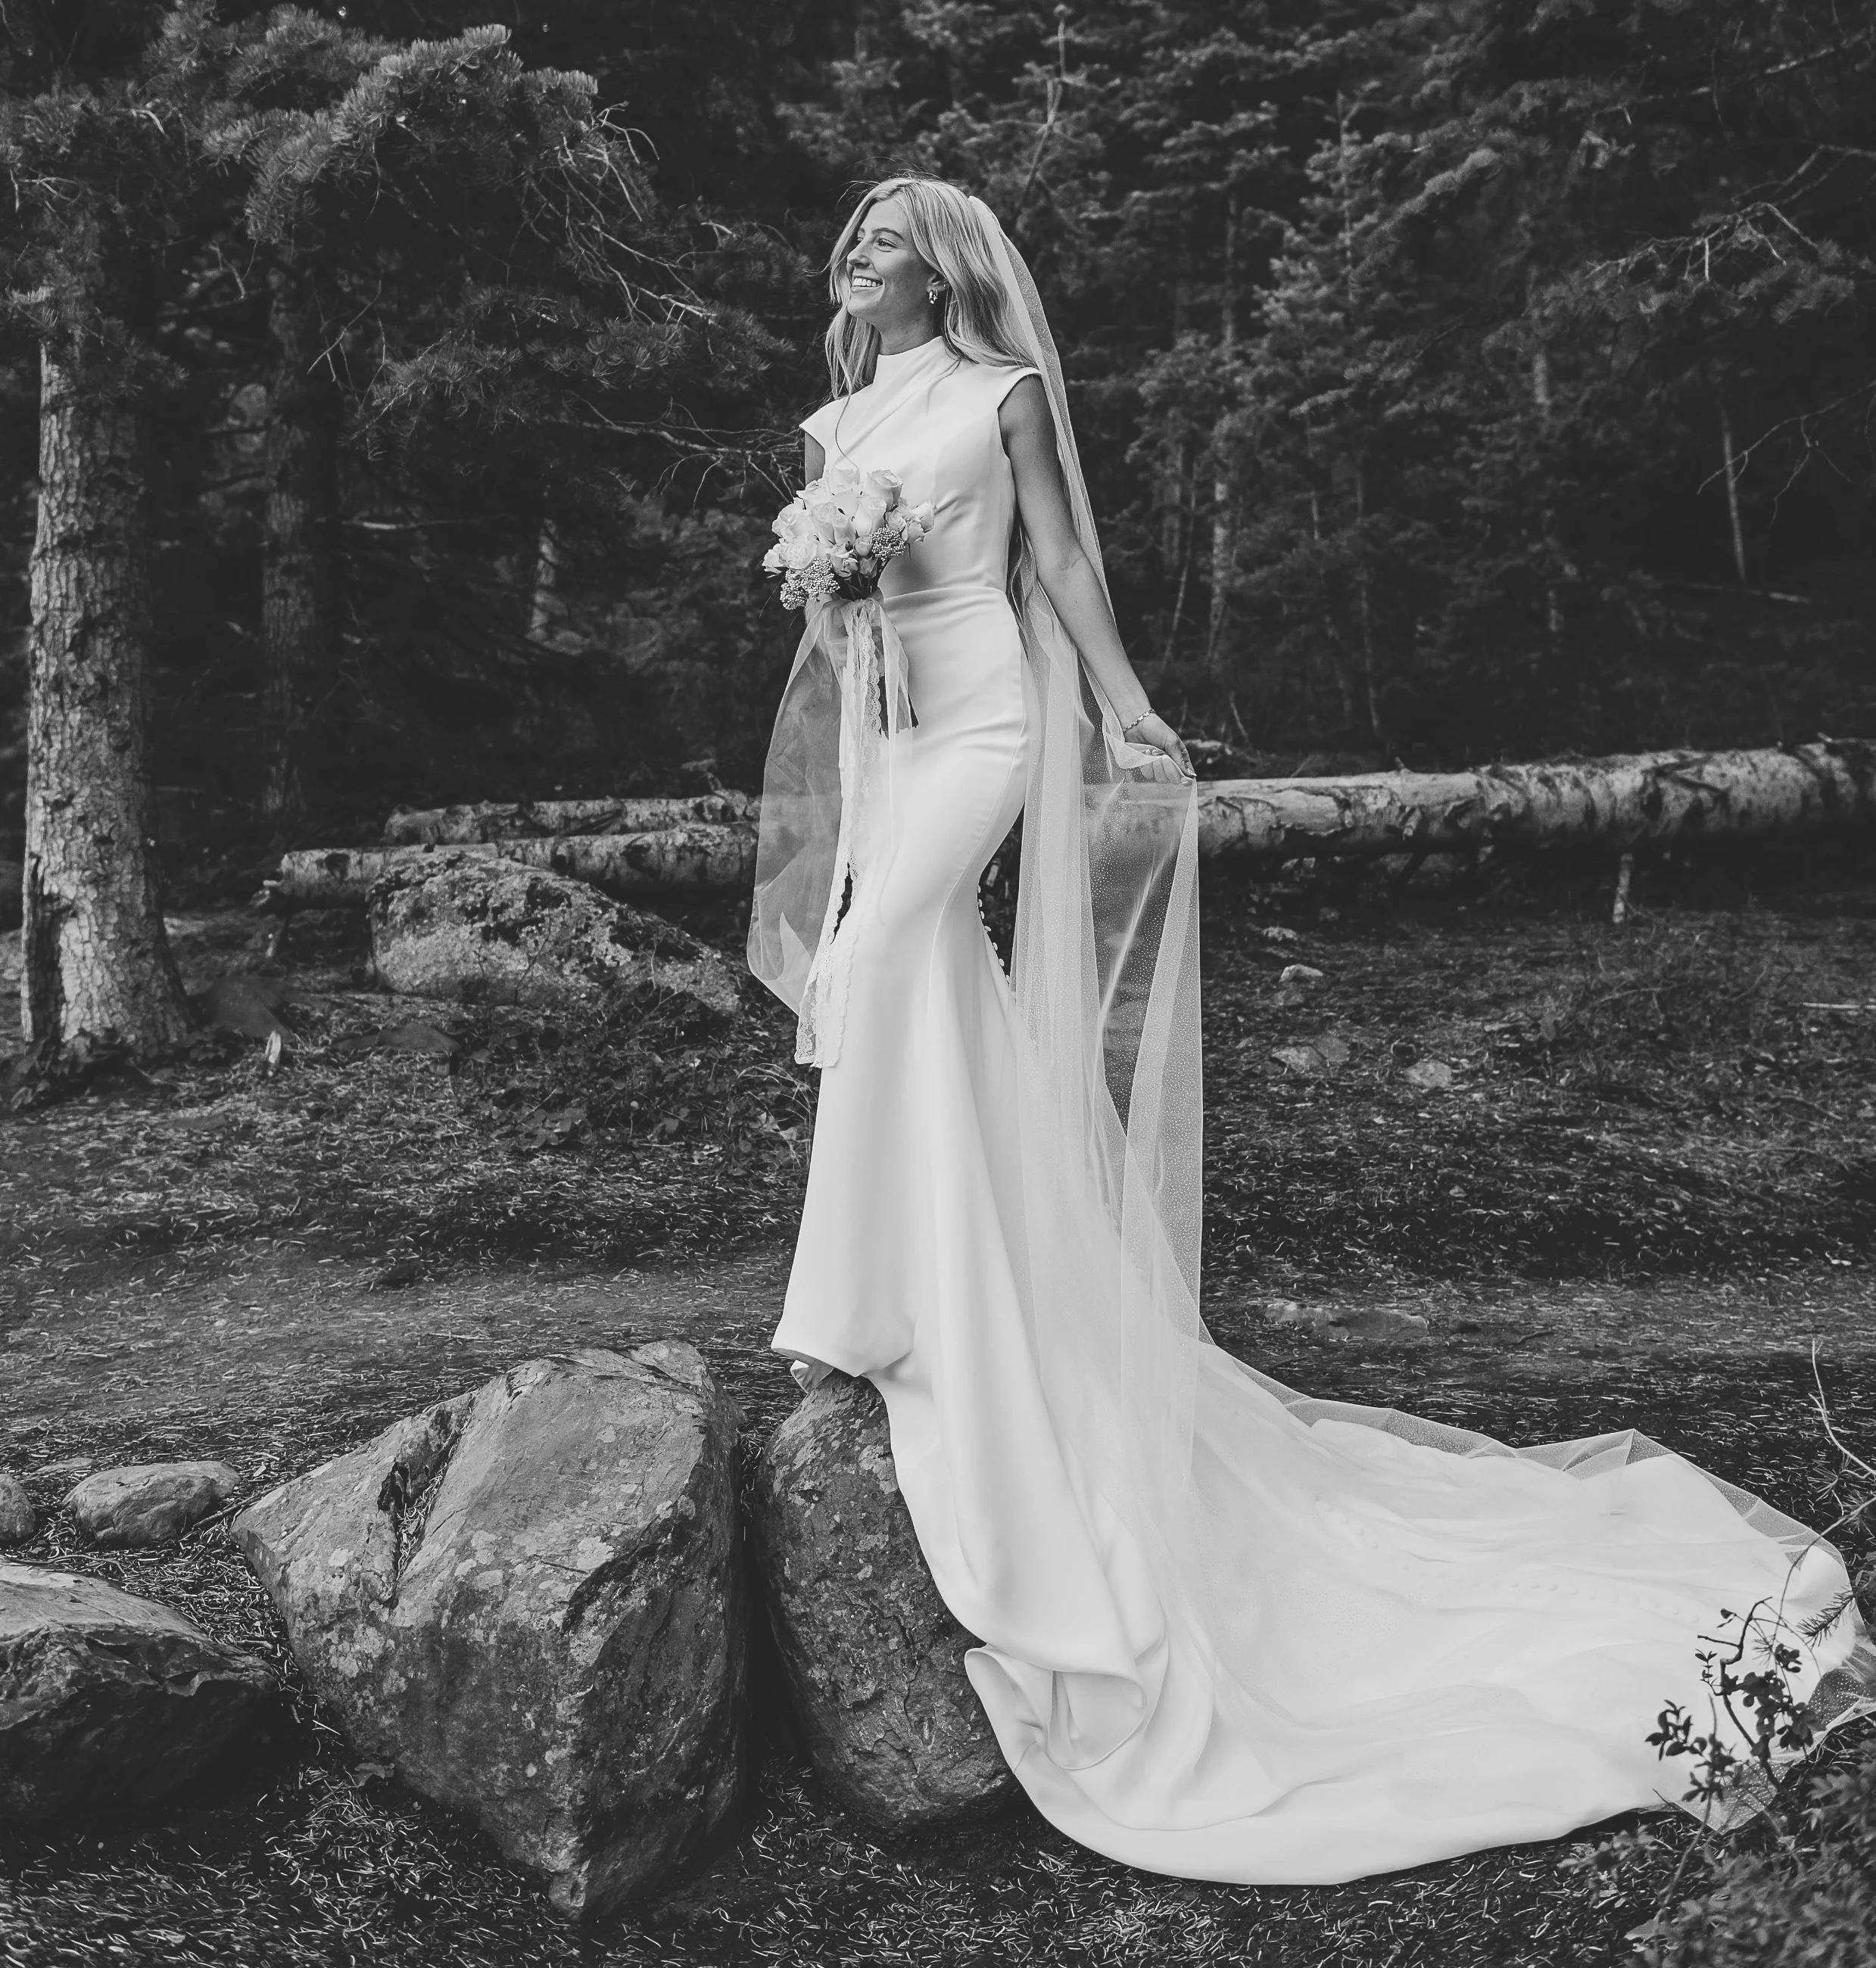 Choosing the Perfect Romantic Wedding Dress for Your Bridal Look